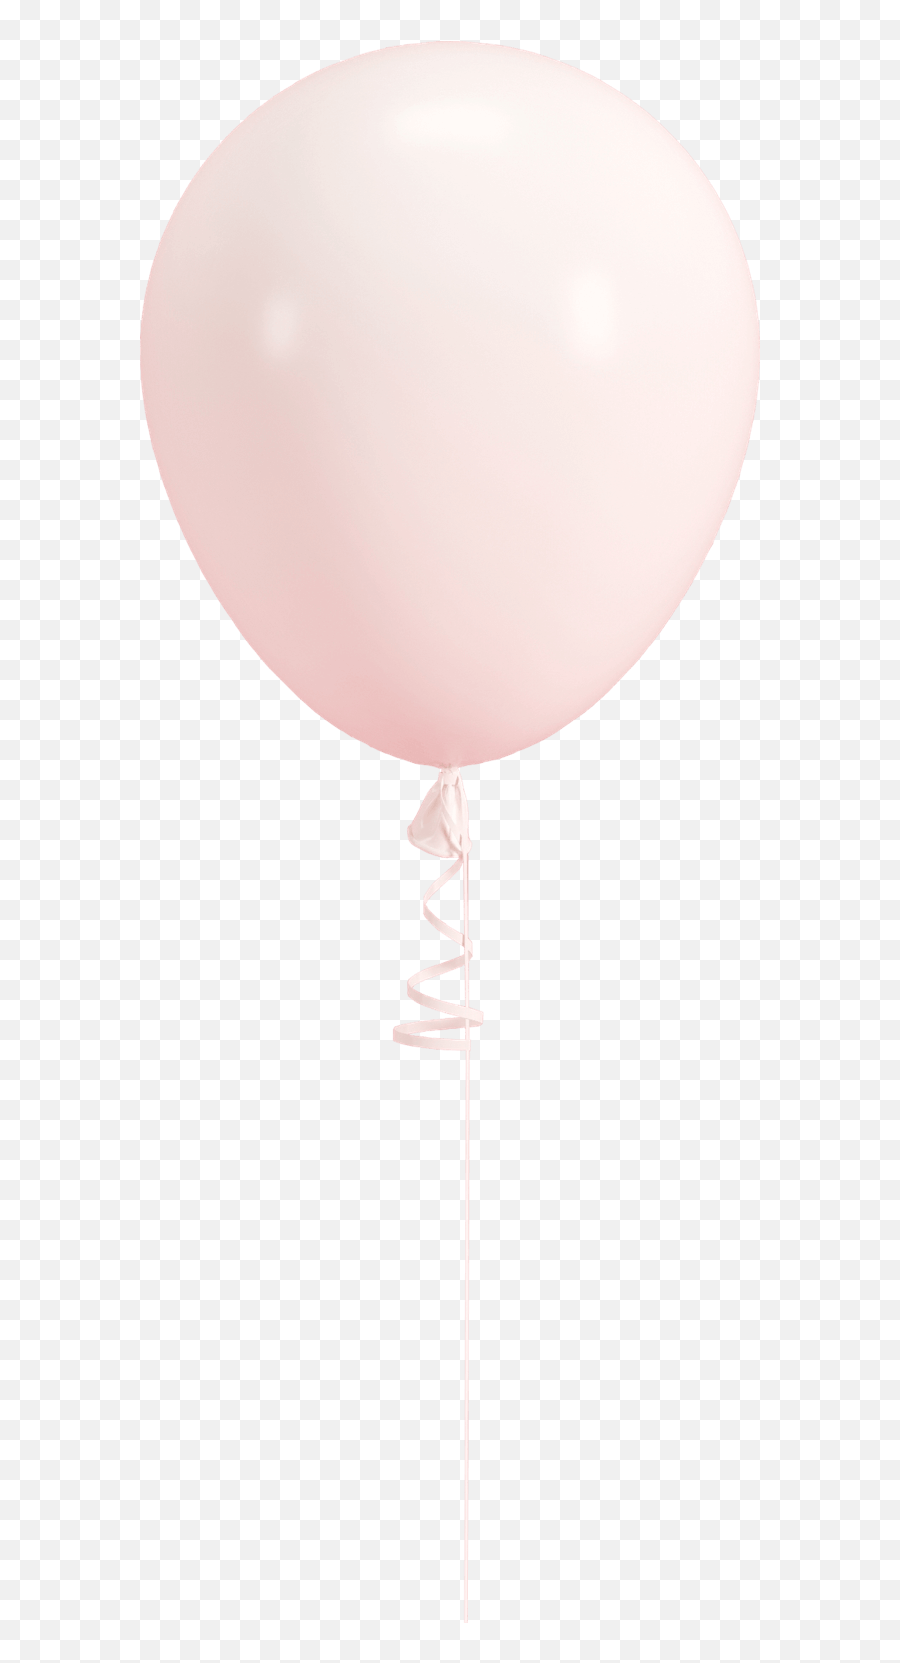 Home - Just Peachy Balloon Png,Ballons Icon Party